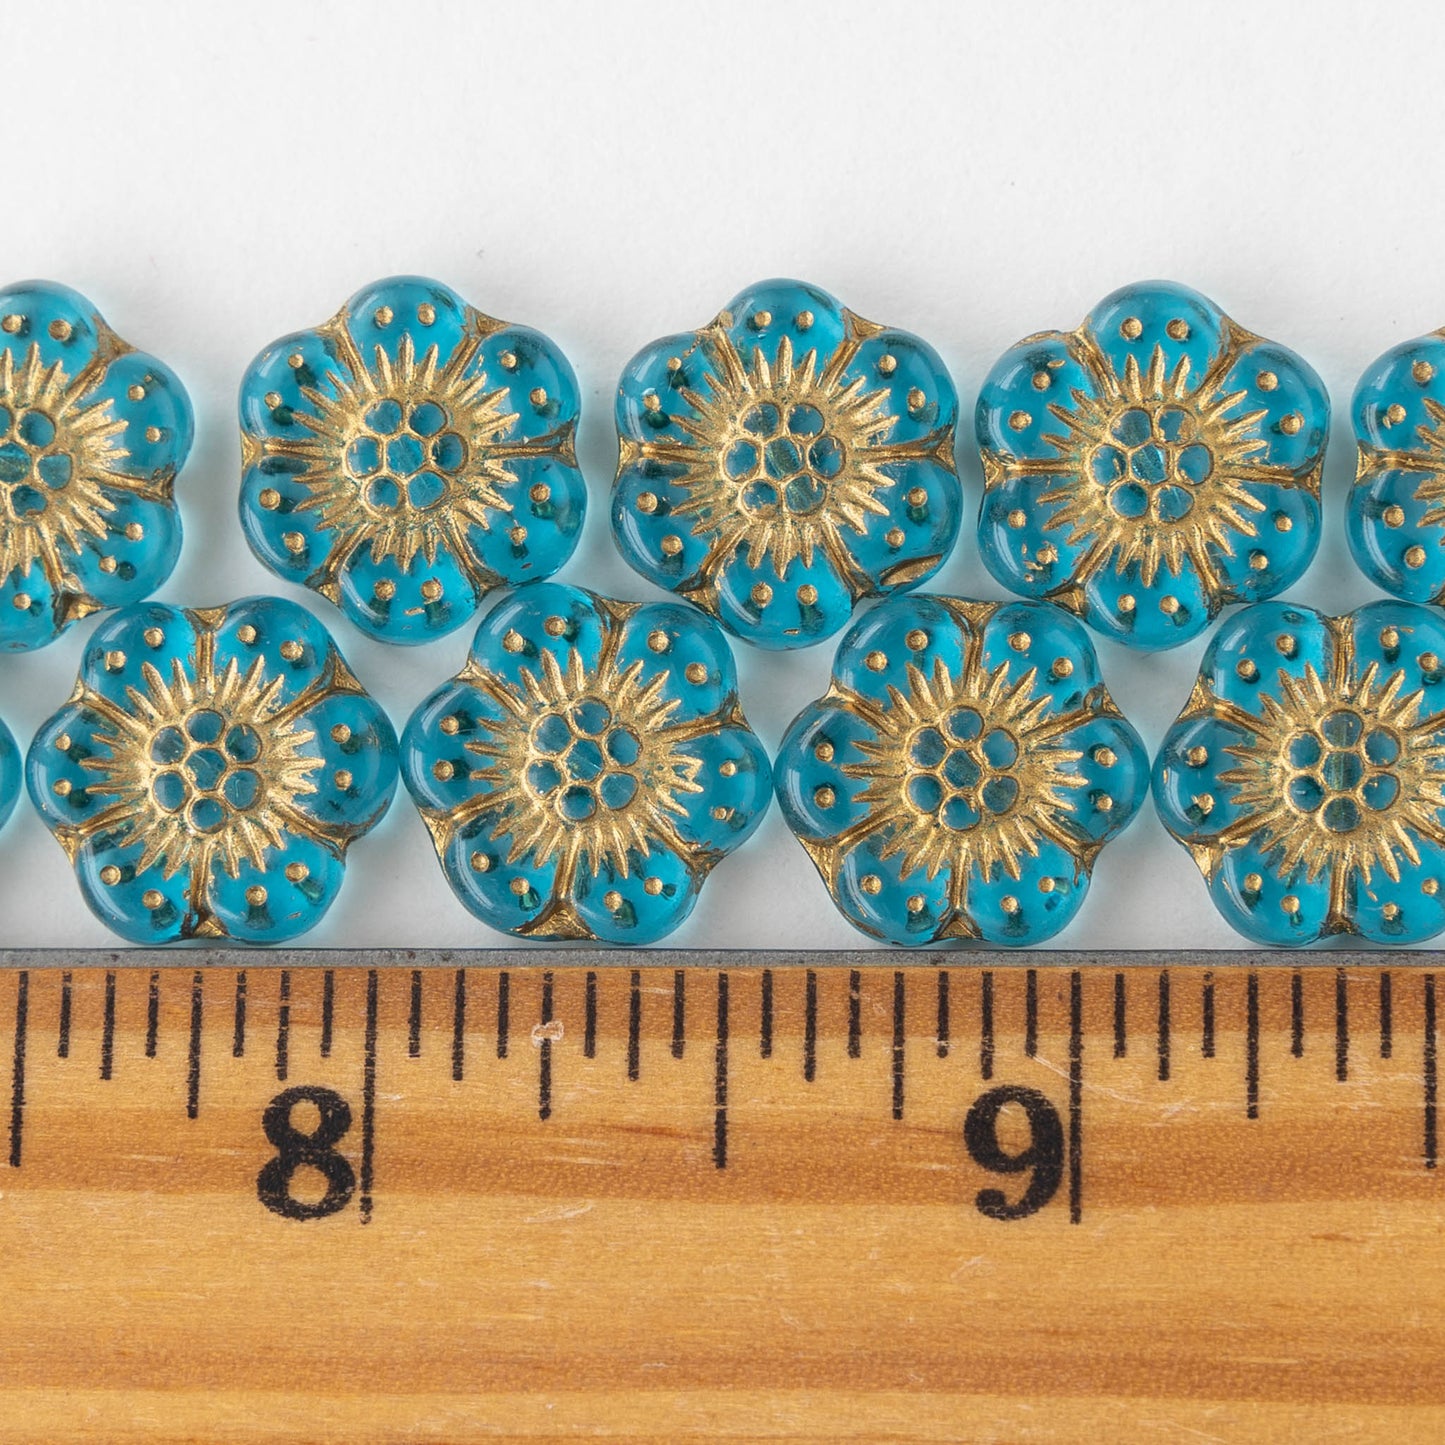 14mm Anemone Flower Beads - Aqua Green  with Gold Wash - 12 Beads